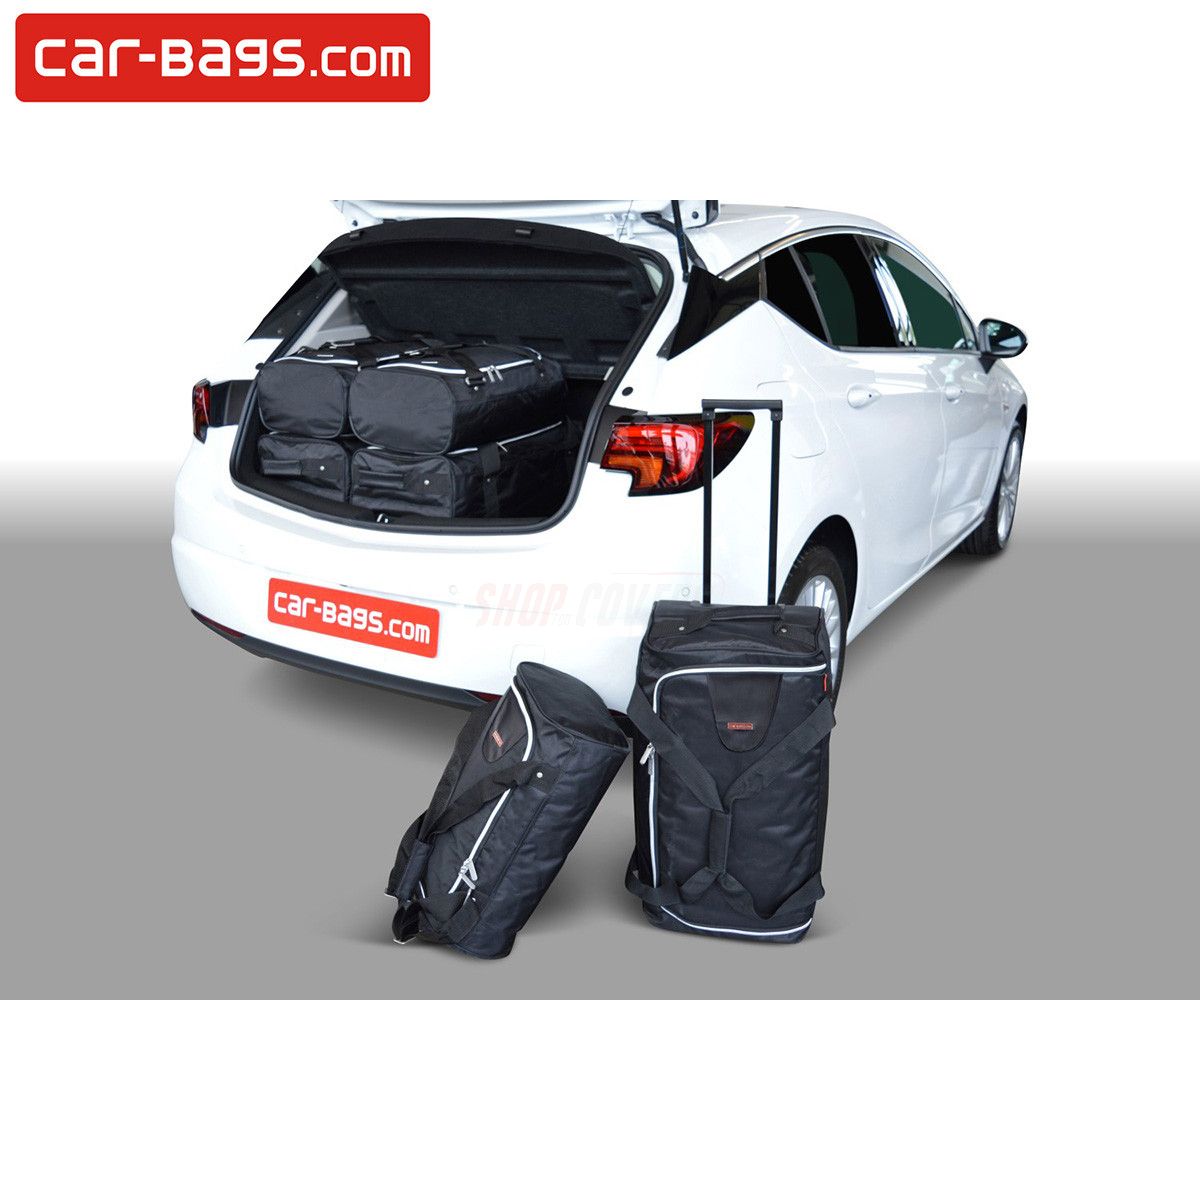 Travel bags fits Opel Astra K tailor made (6 bags), Time and space saving  for € 379, Perfect fit Car Bags